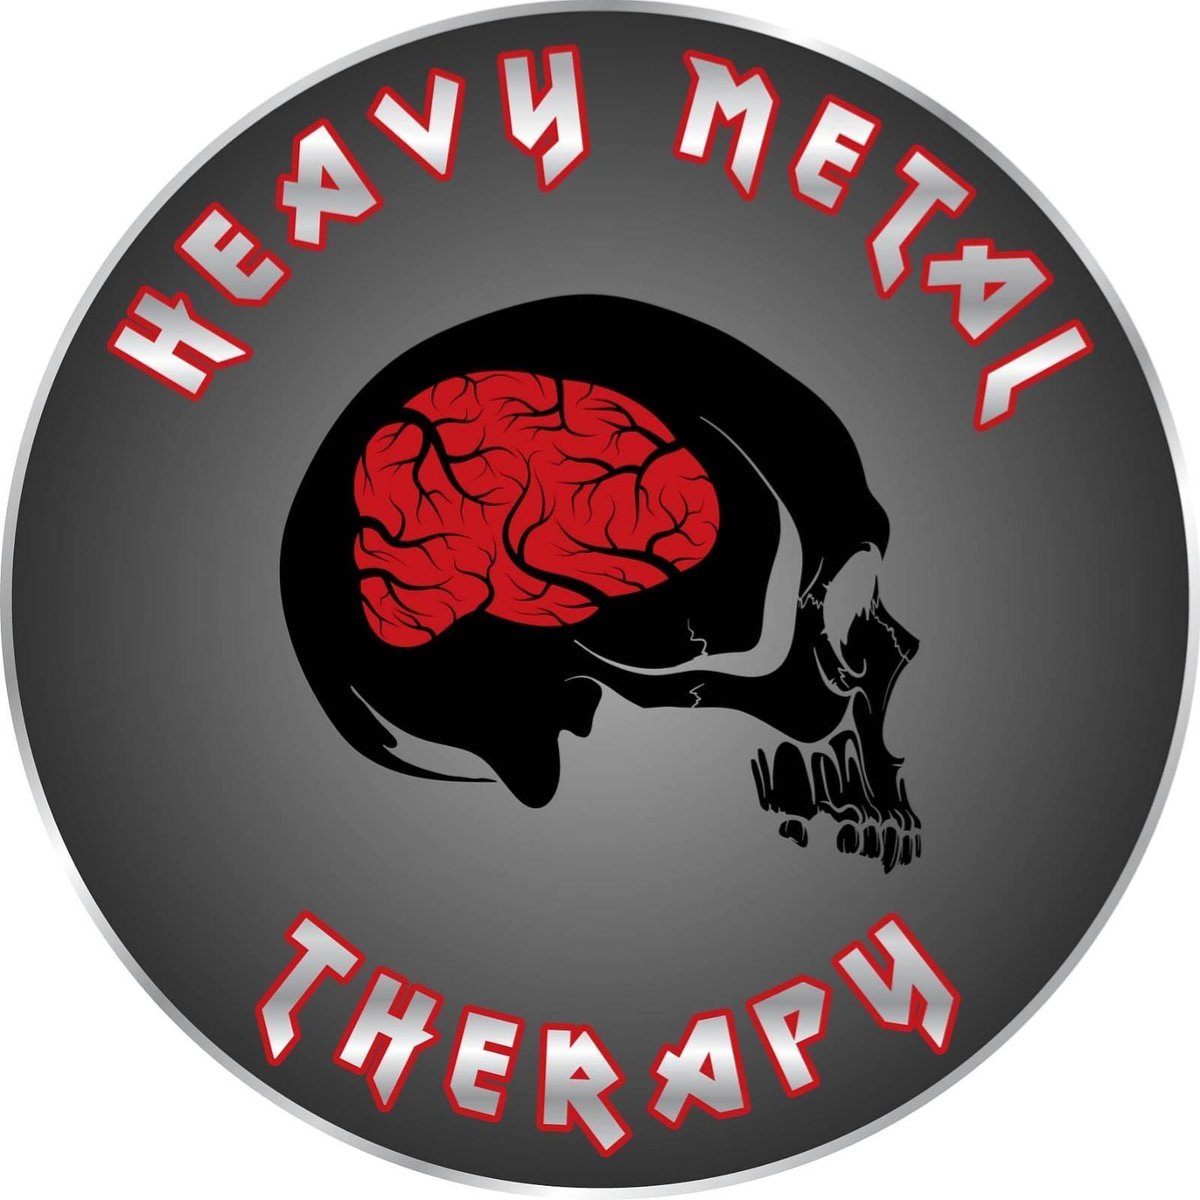 A quick shout out to the awesome Heavy Metal Therapy. Just had a nice chat with Matt which will be on our YouTube in a couple of weeks as part of #MentalHealthAwareness week (May 13-19) 
@heavytherapy 
#metal #heavymetal #music #mentalhealth #mentalhealthmatters #MoshvilleTimes